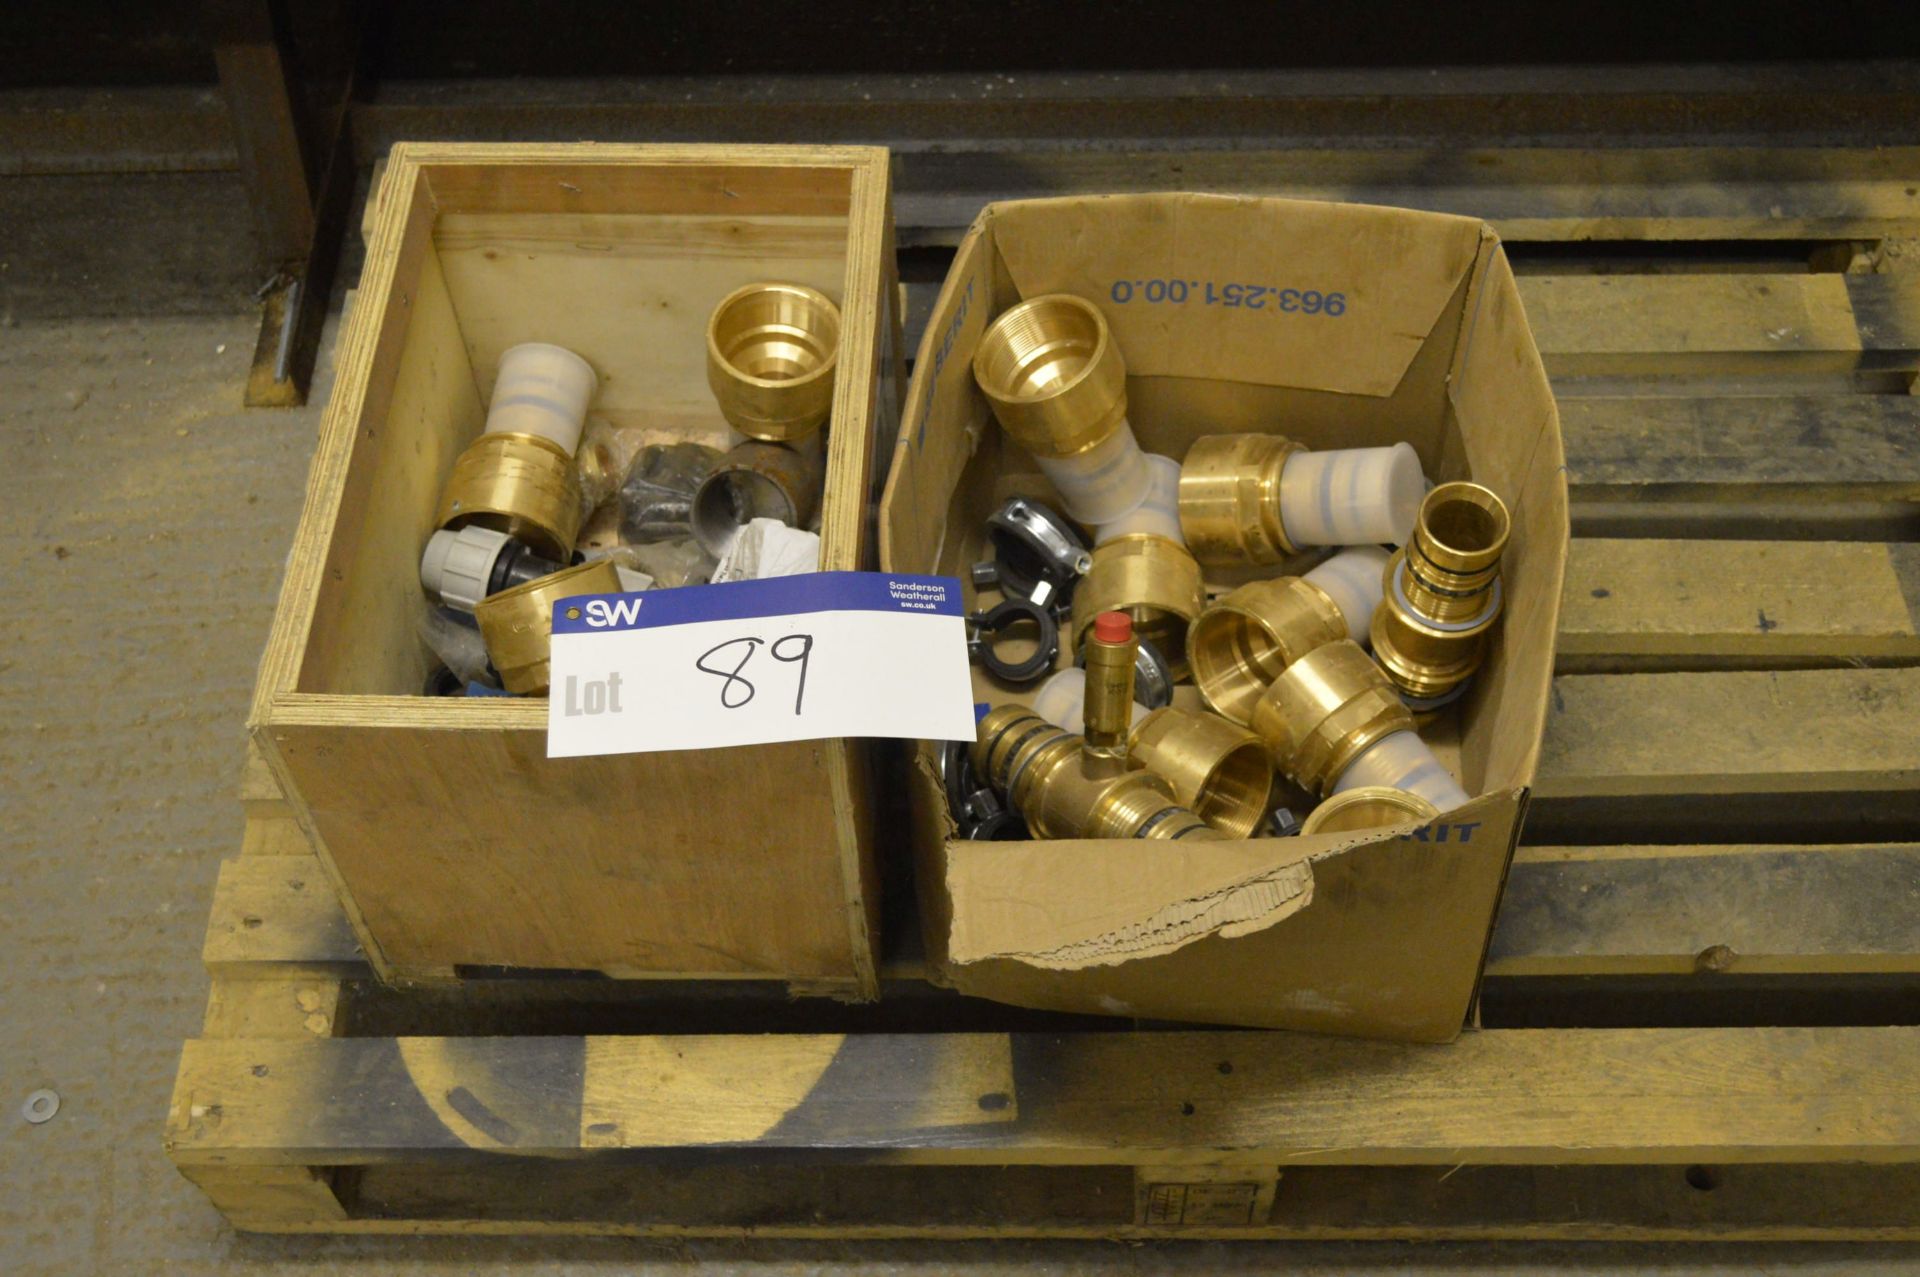 Brass Pipe Couplings and Equipment, in two boxes